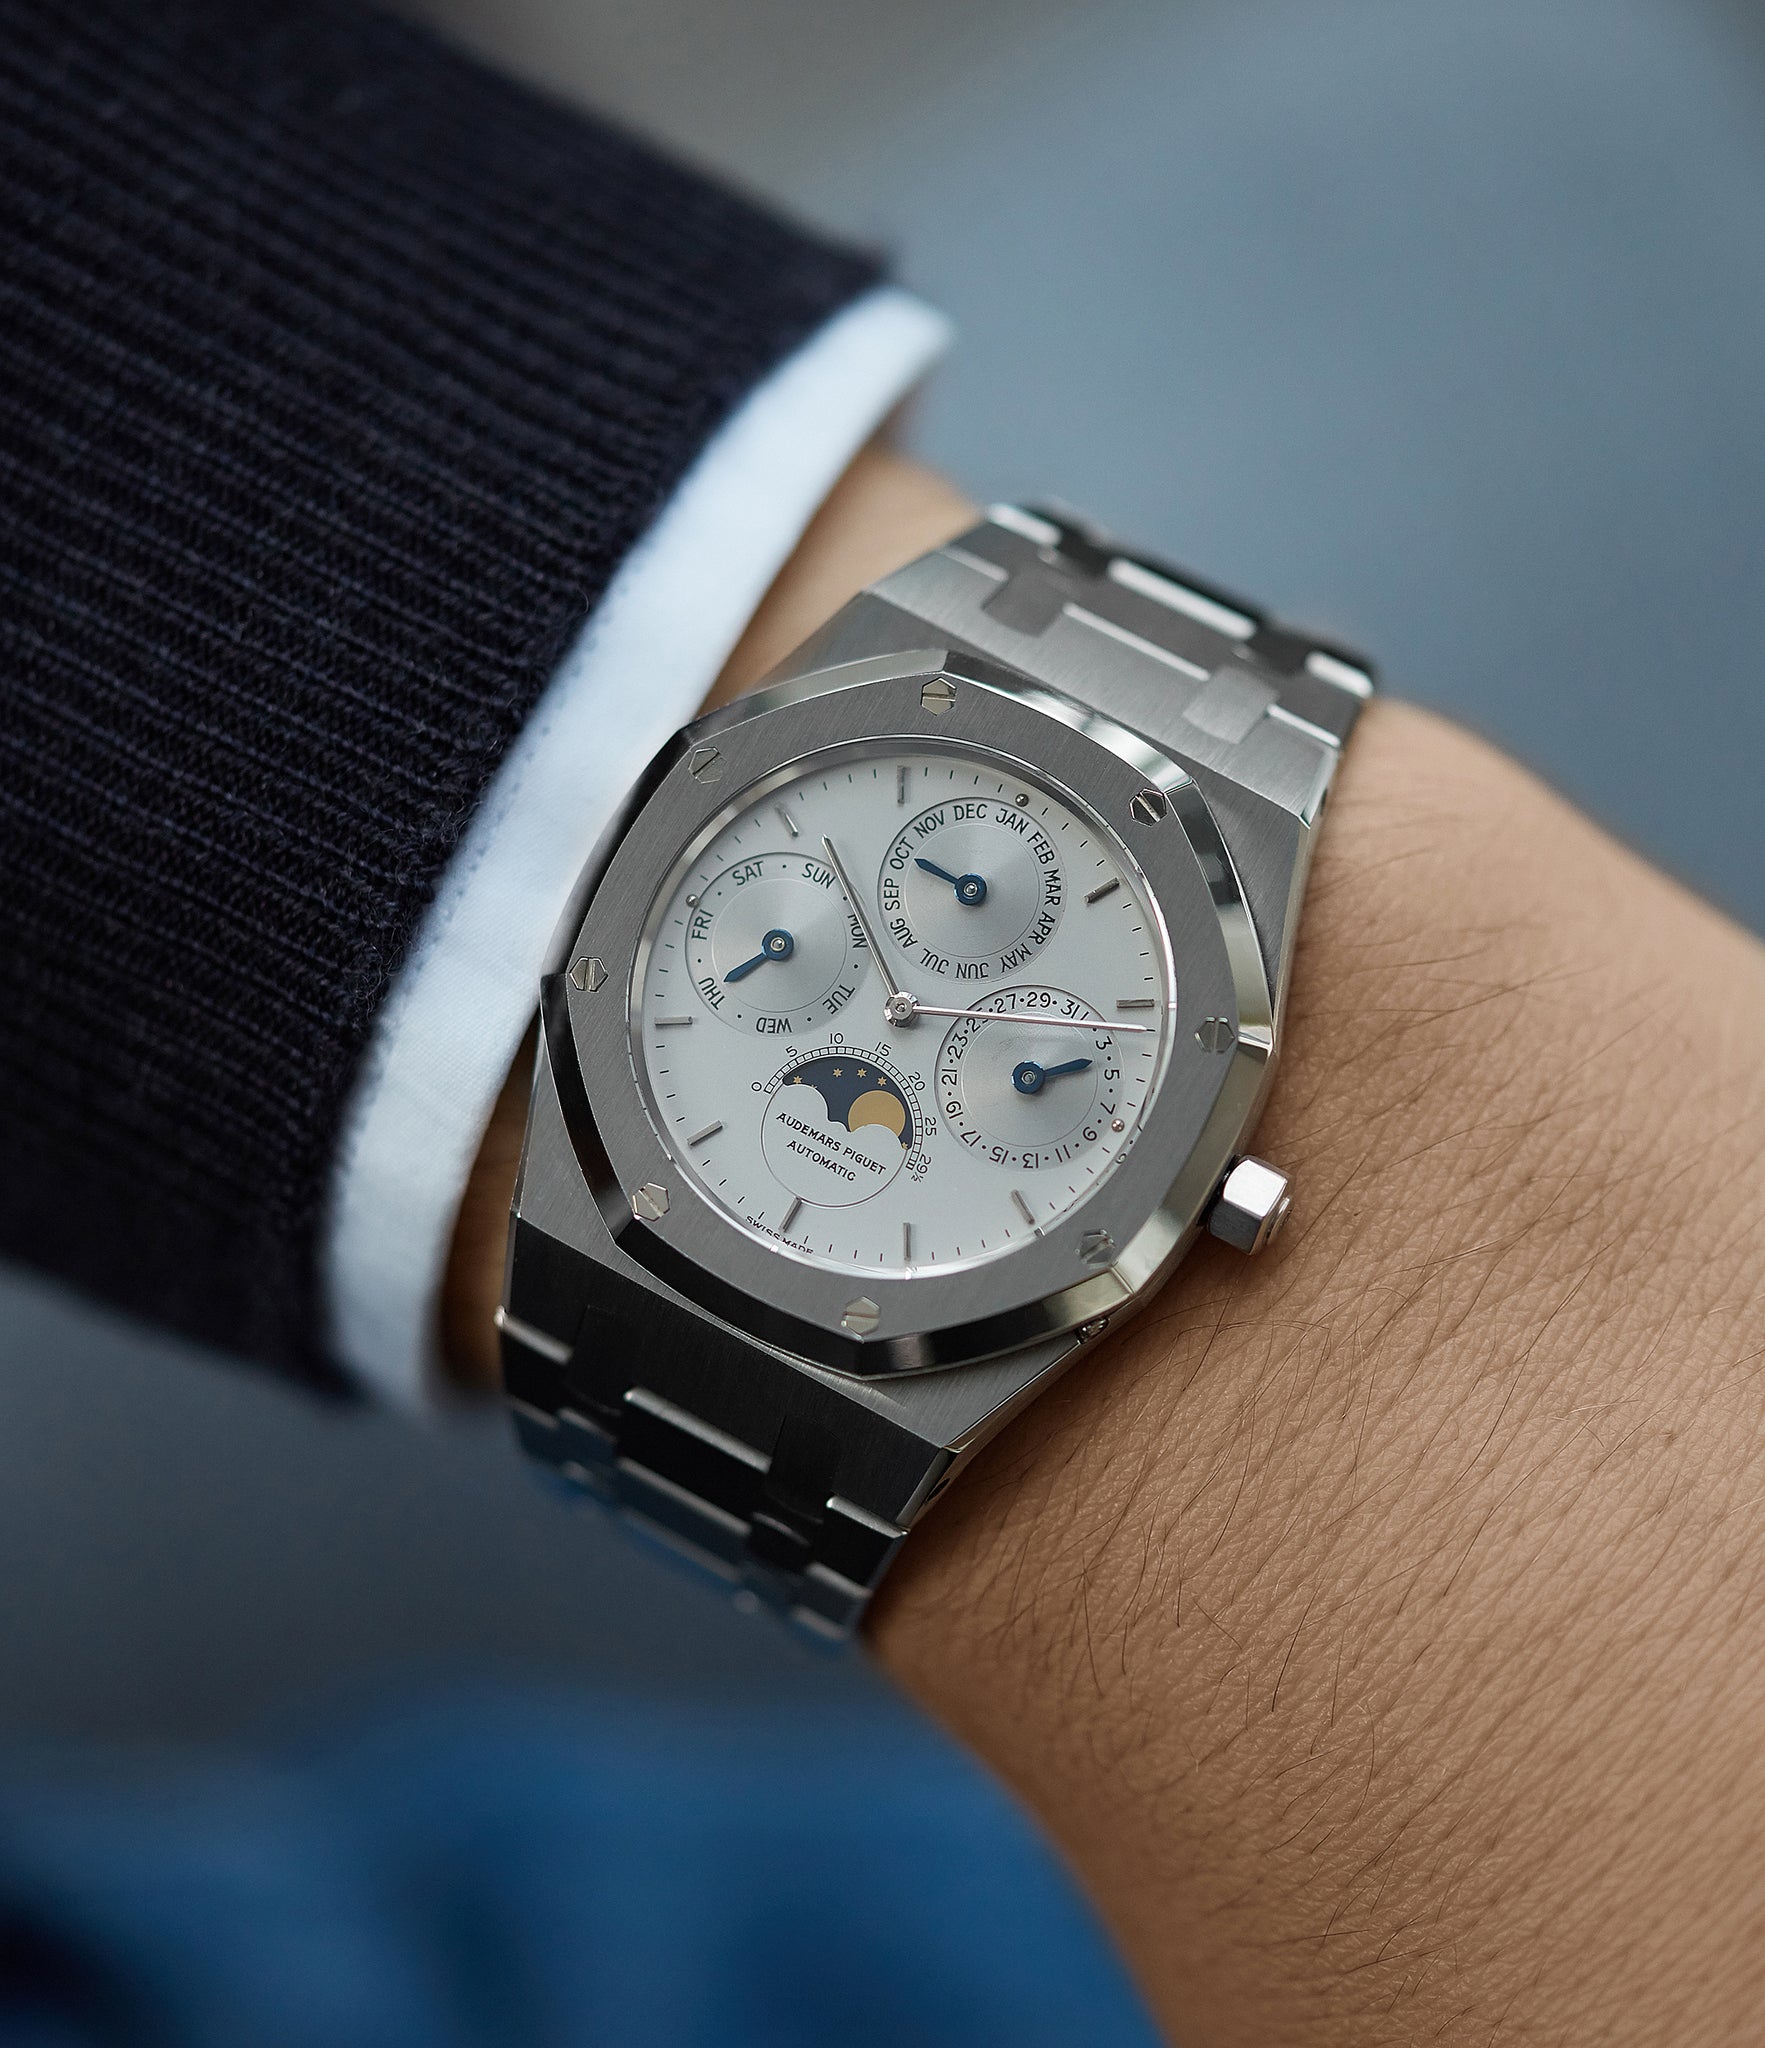 on the wrist Audemars Piguet Royal Oak Perpetual Calendar 25654ST steel vintage watch for sale online at A Collected Man London UK specialist of rare watches